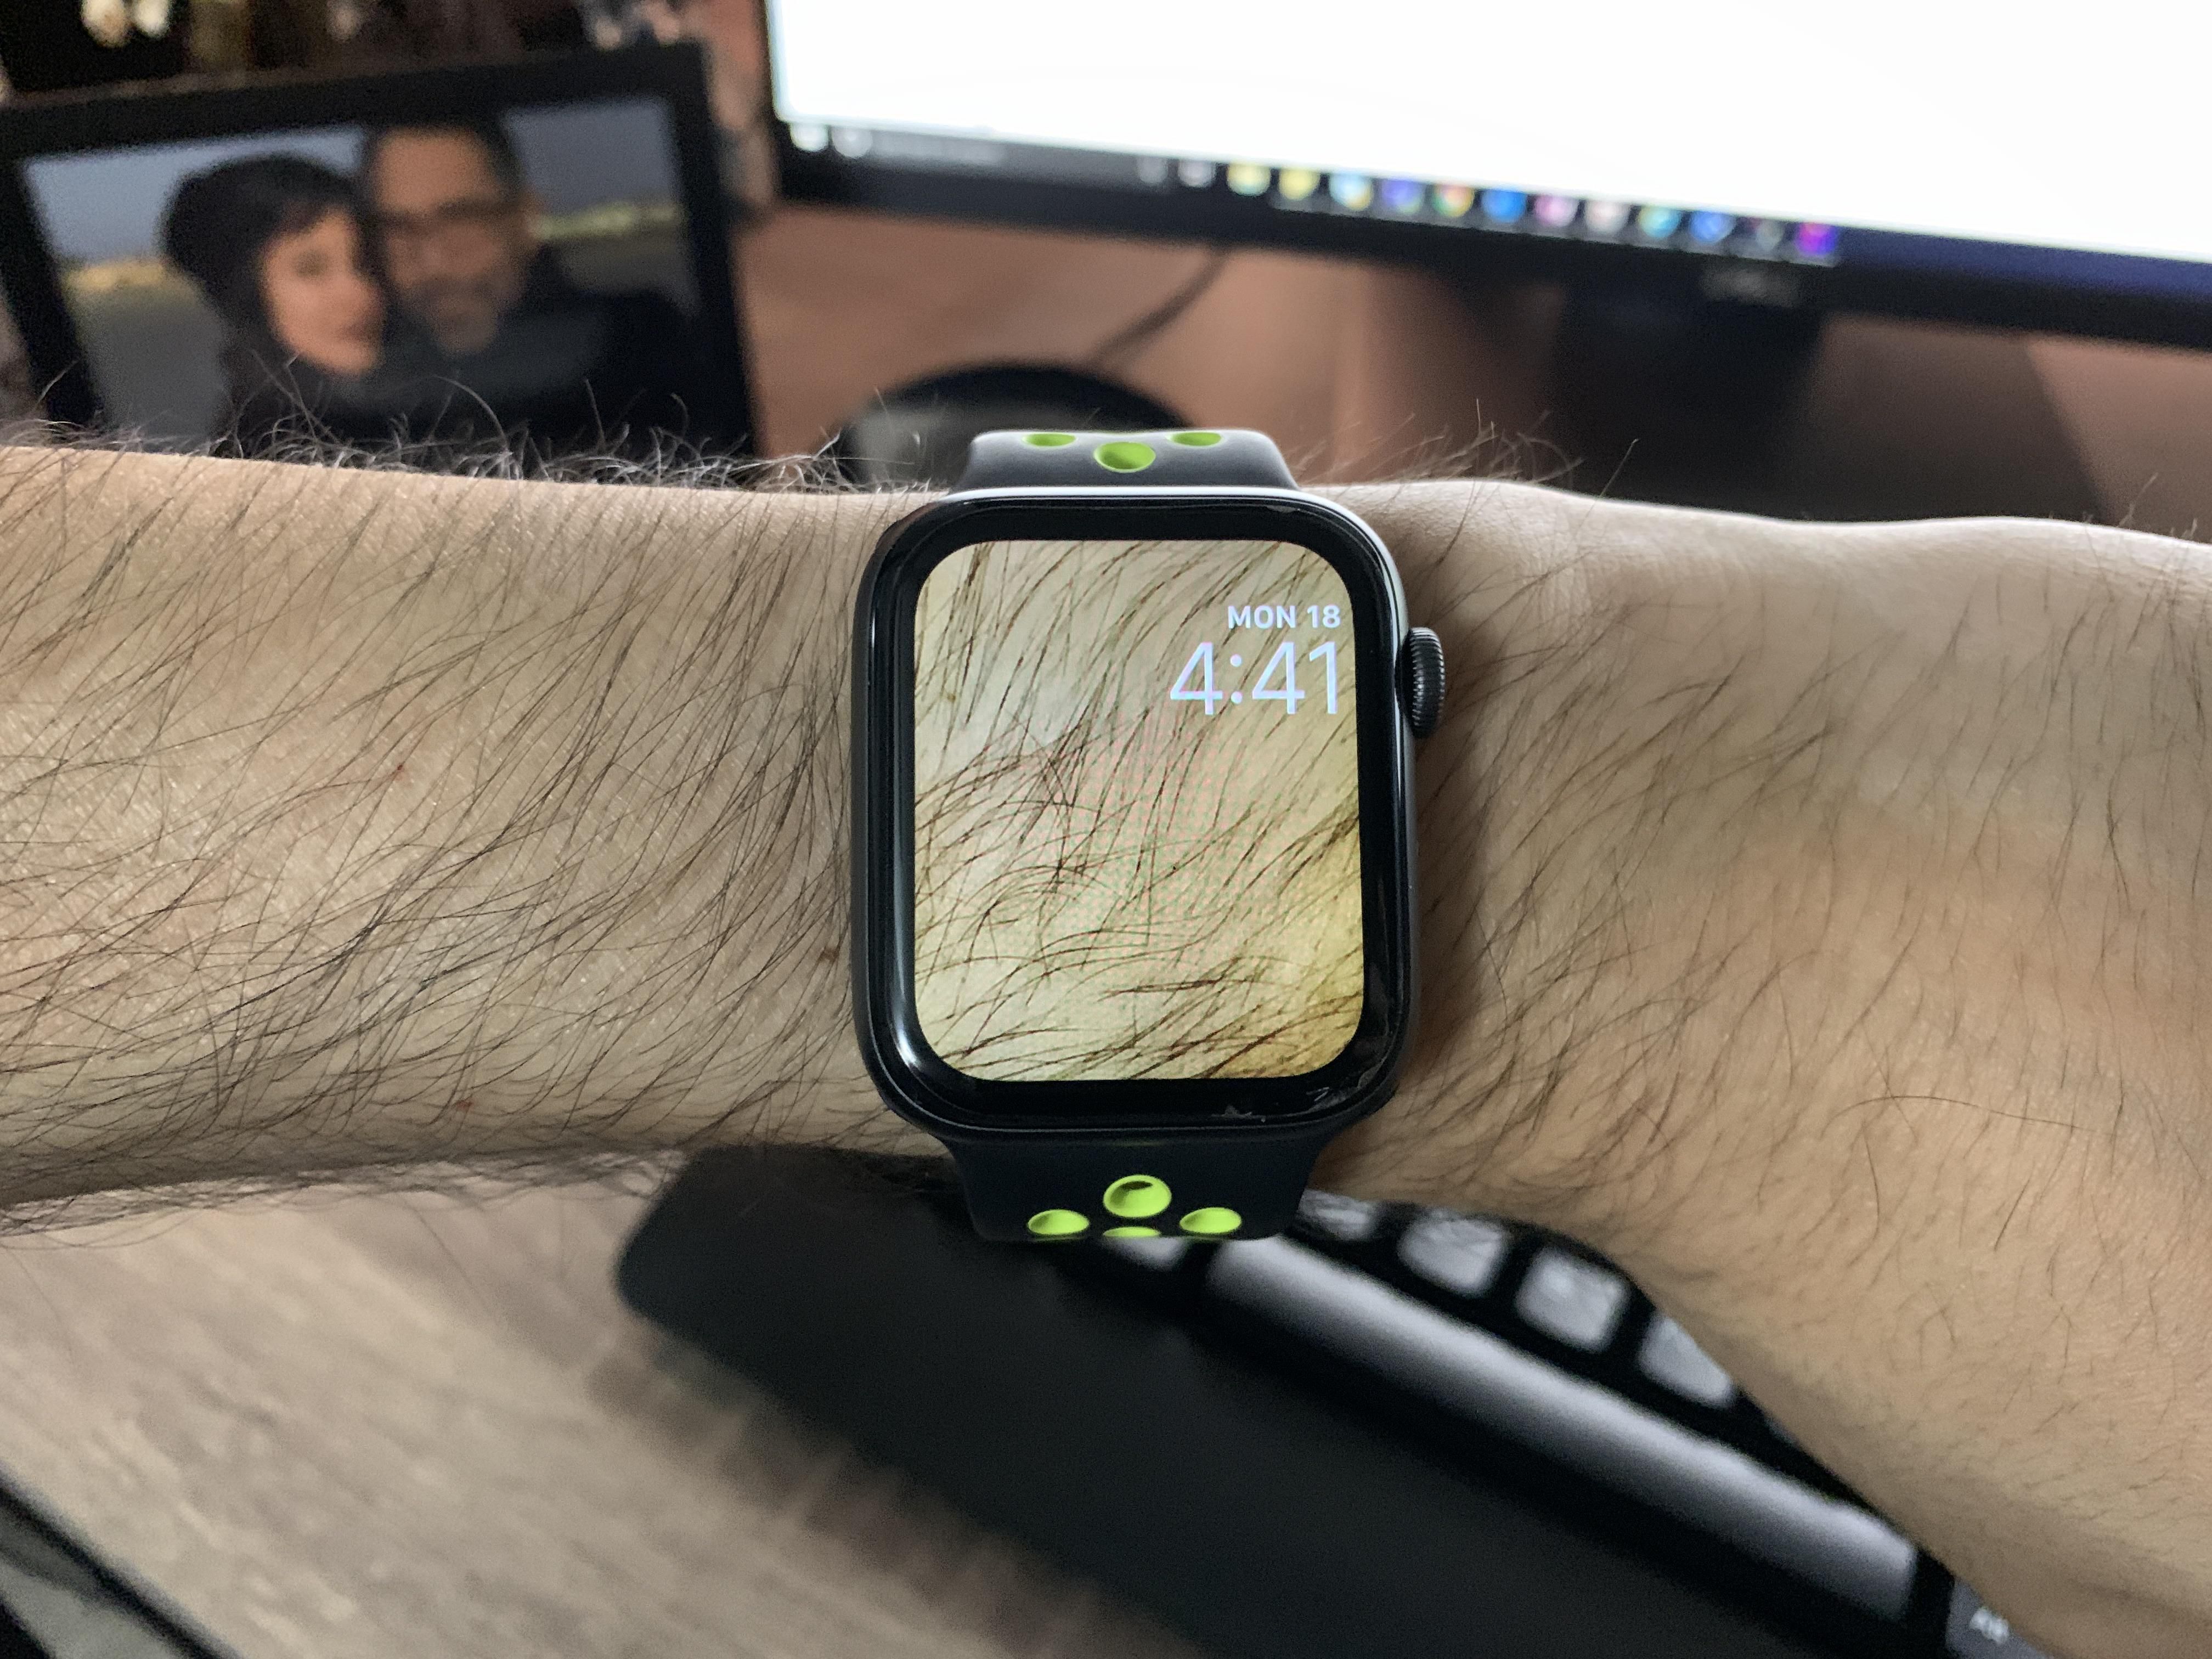 My new watch face. Sorry not sorry.